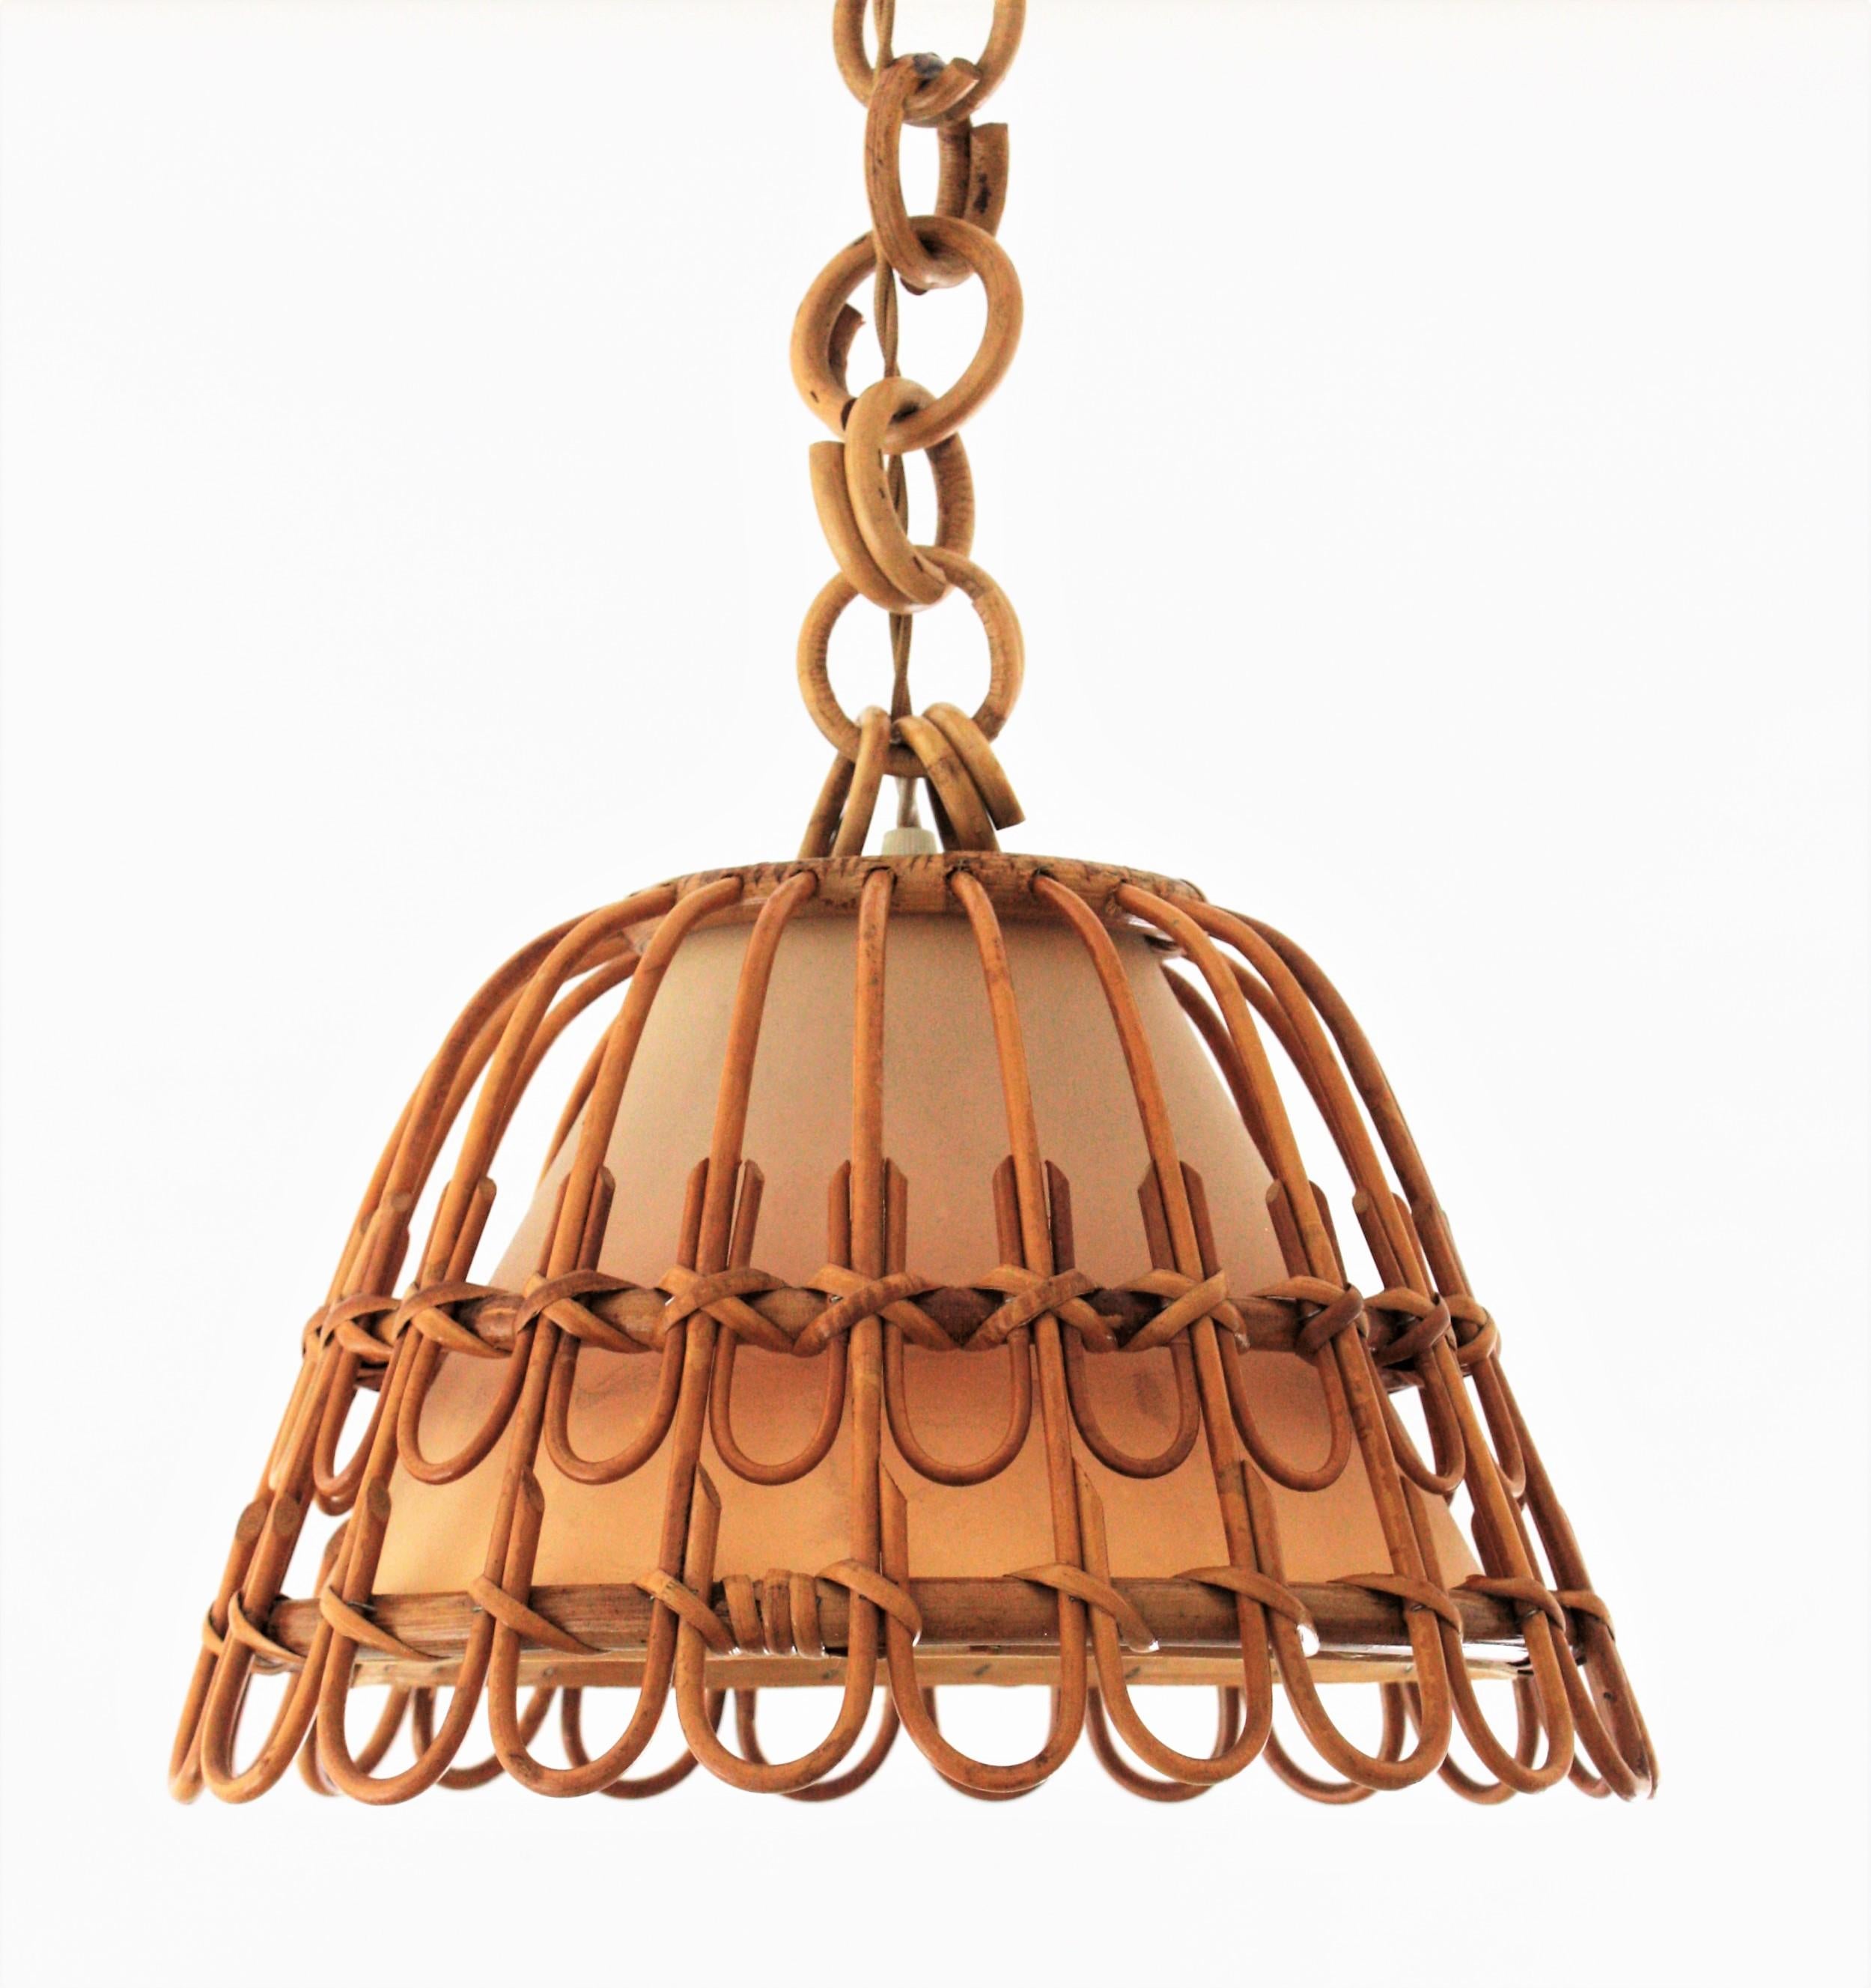 A beautiful handcrafted rattan /wicker pendant light with geometric petal design, Spain, 1960s.
It hangs from a rattan / bamboo chain that can be modified to make it shorter and it has a shade light difusser to filter the light. This lamp could add